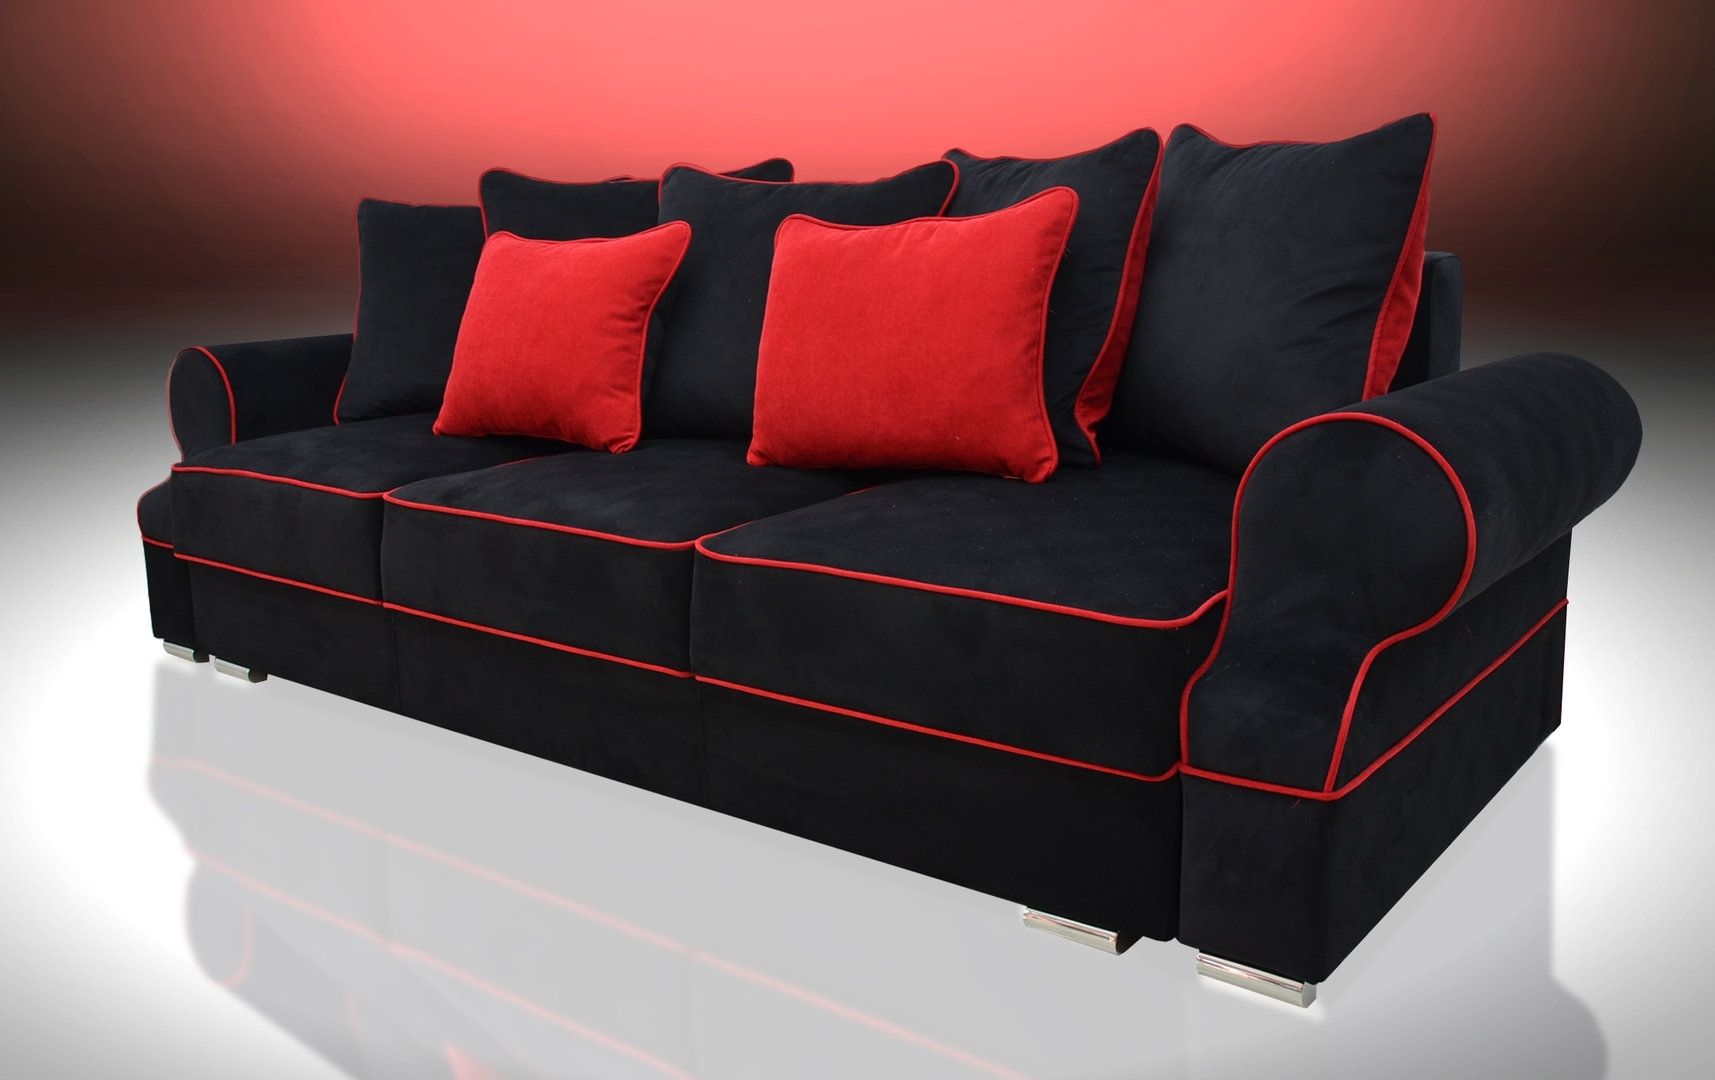 Bed 3 Seater Royal, Black/red Velvet Fabric Pertaining To Red And Black Sofas (View 6 of 10)